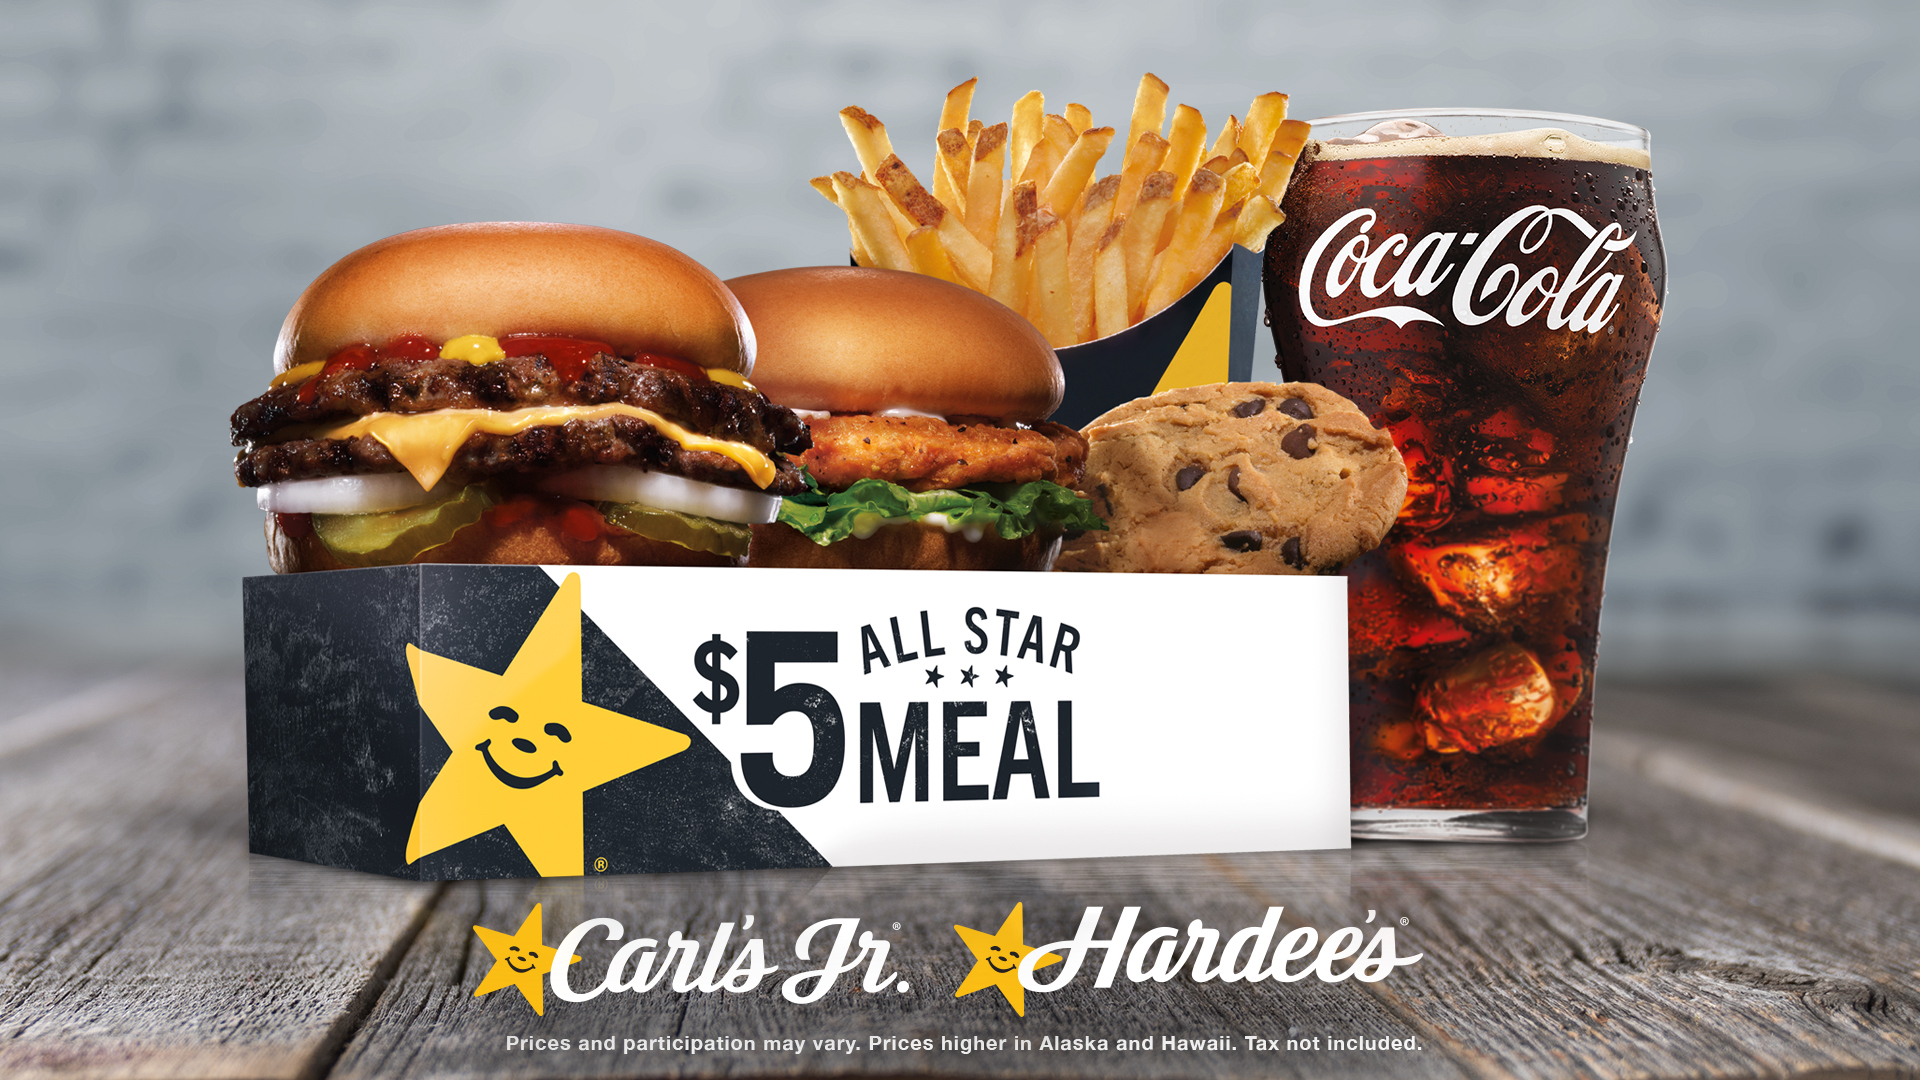 Carl’s Jr. and Hardee’s Launch Their First Box Meal, Ups the Quality